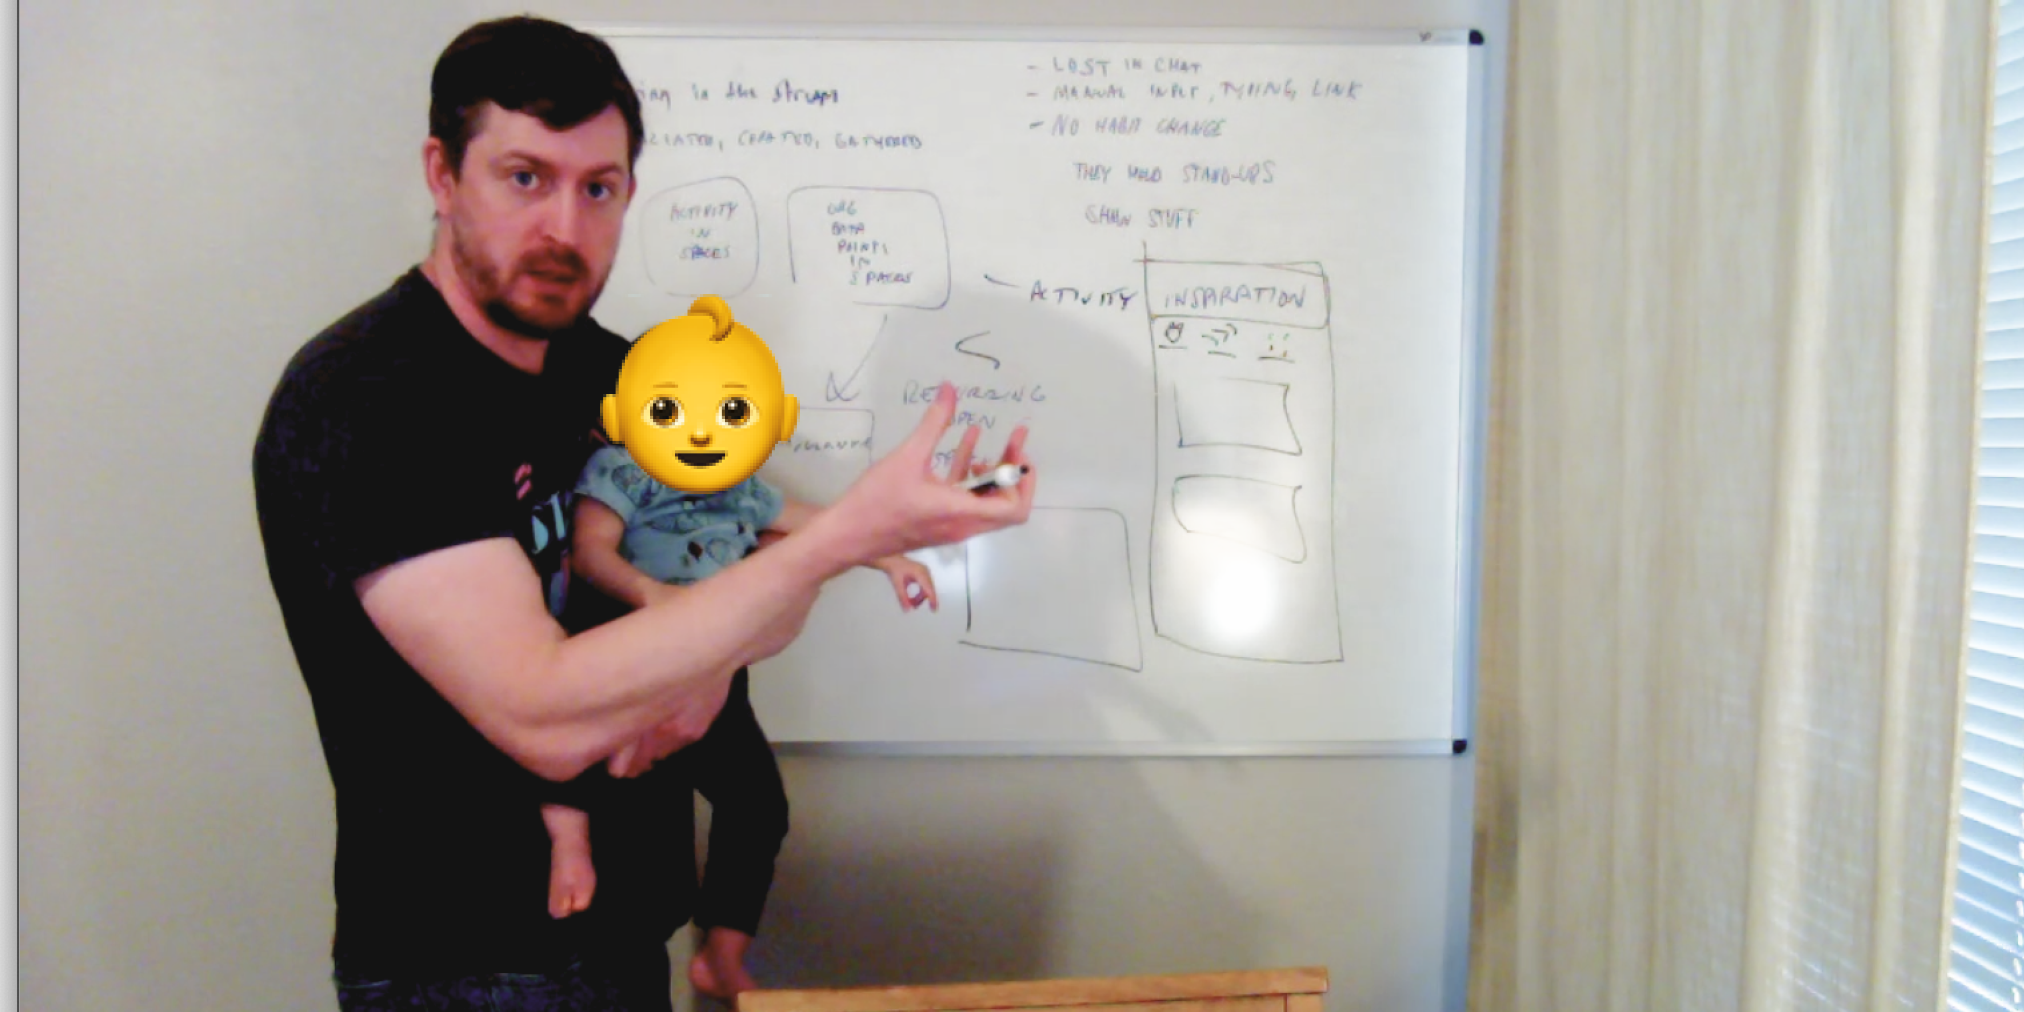 Peak WFH moment: Designer Terry at the Whiteboard, holding a baby